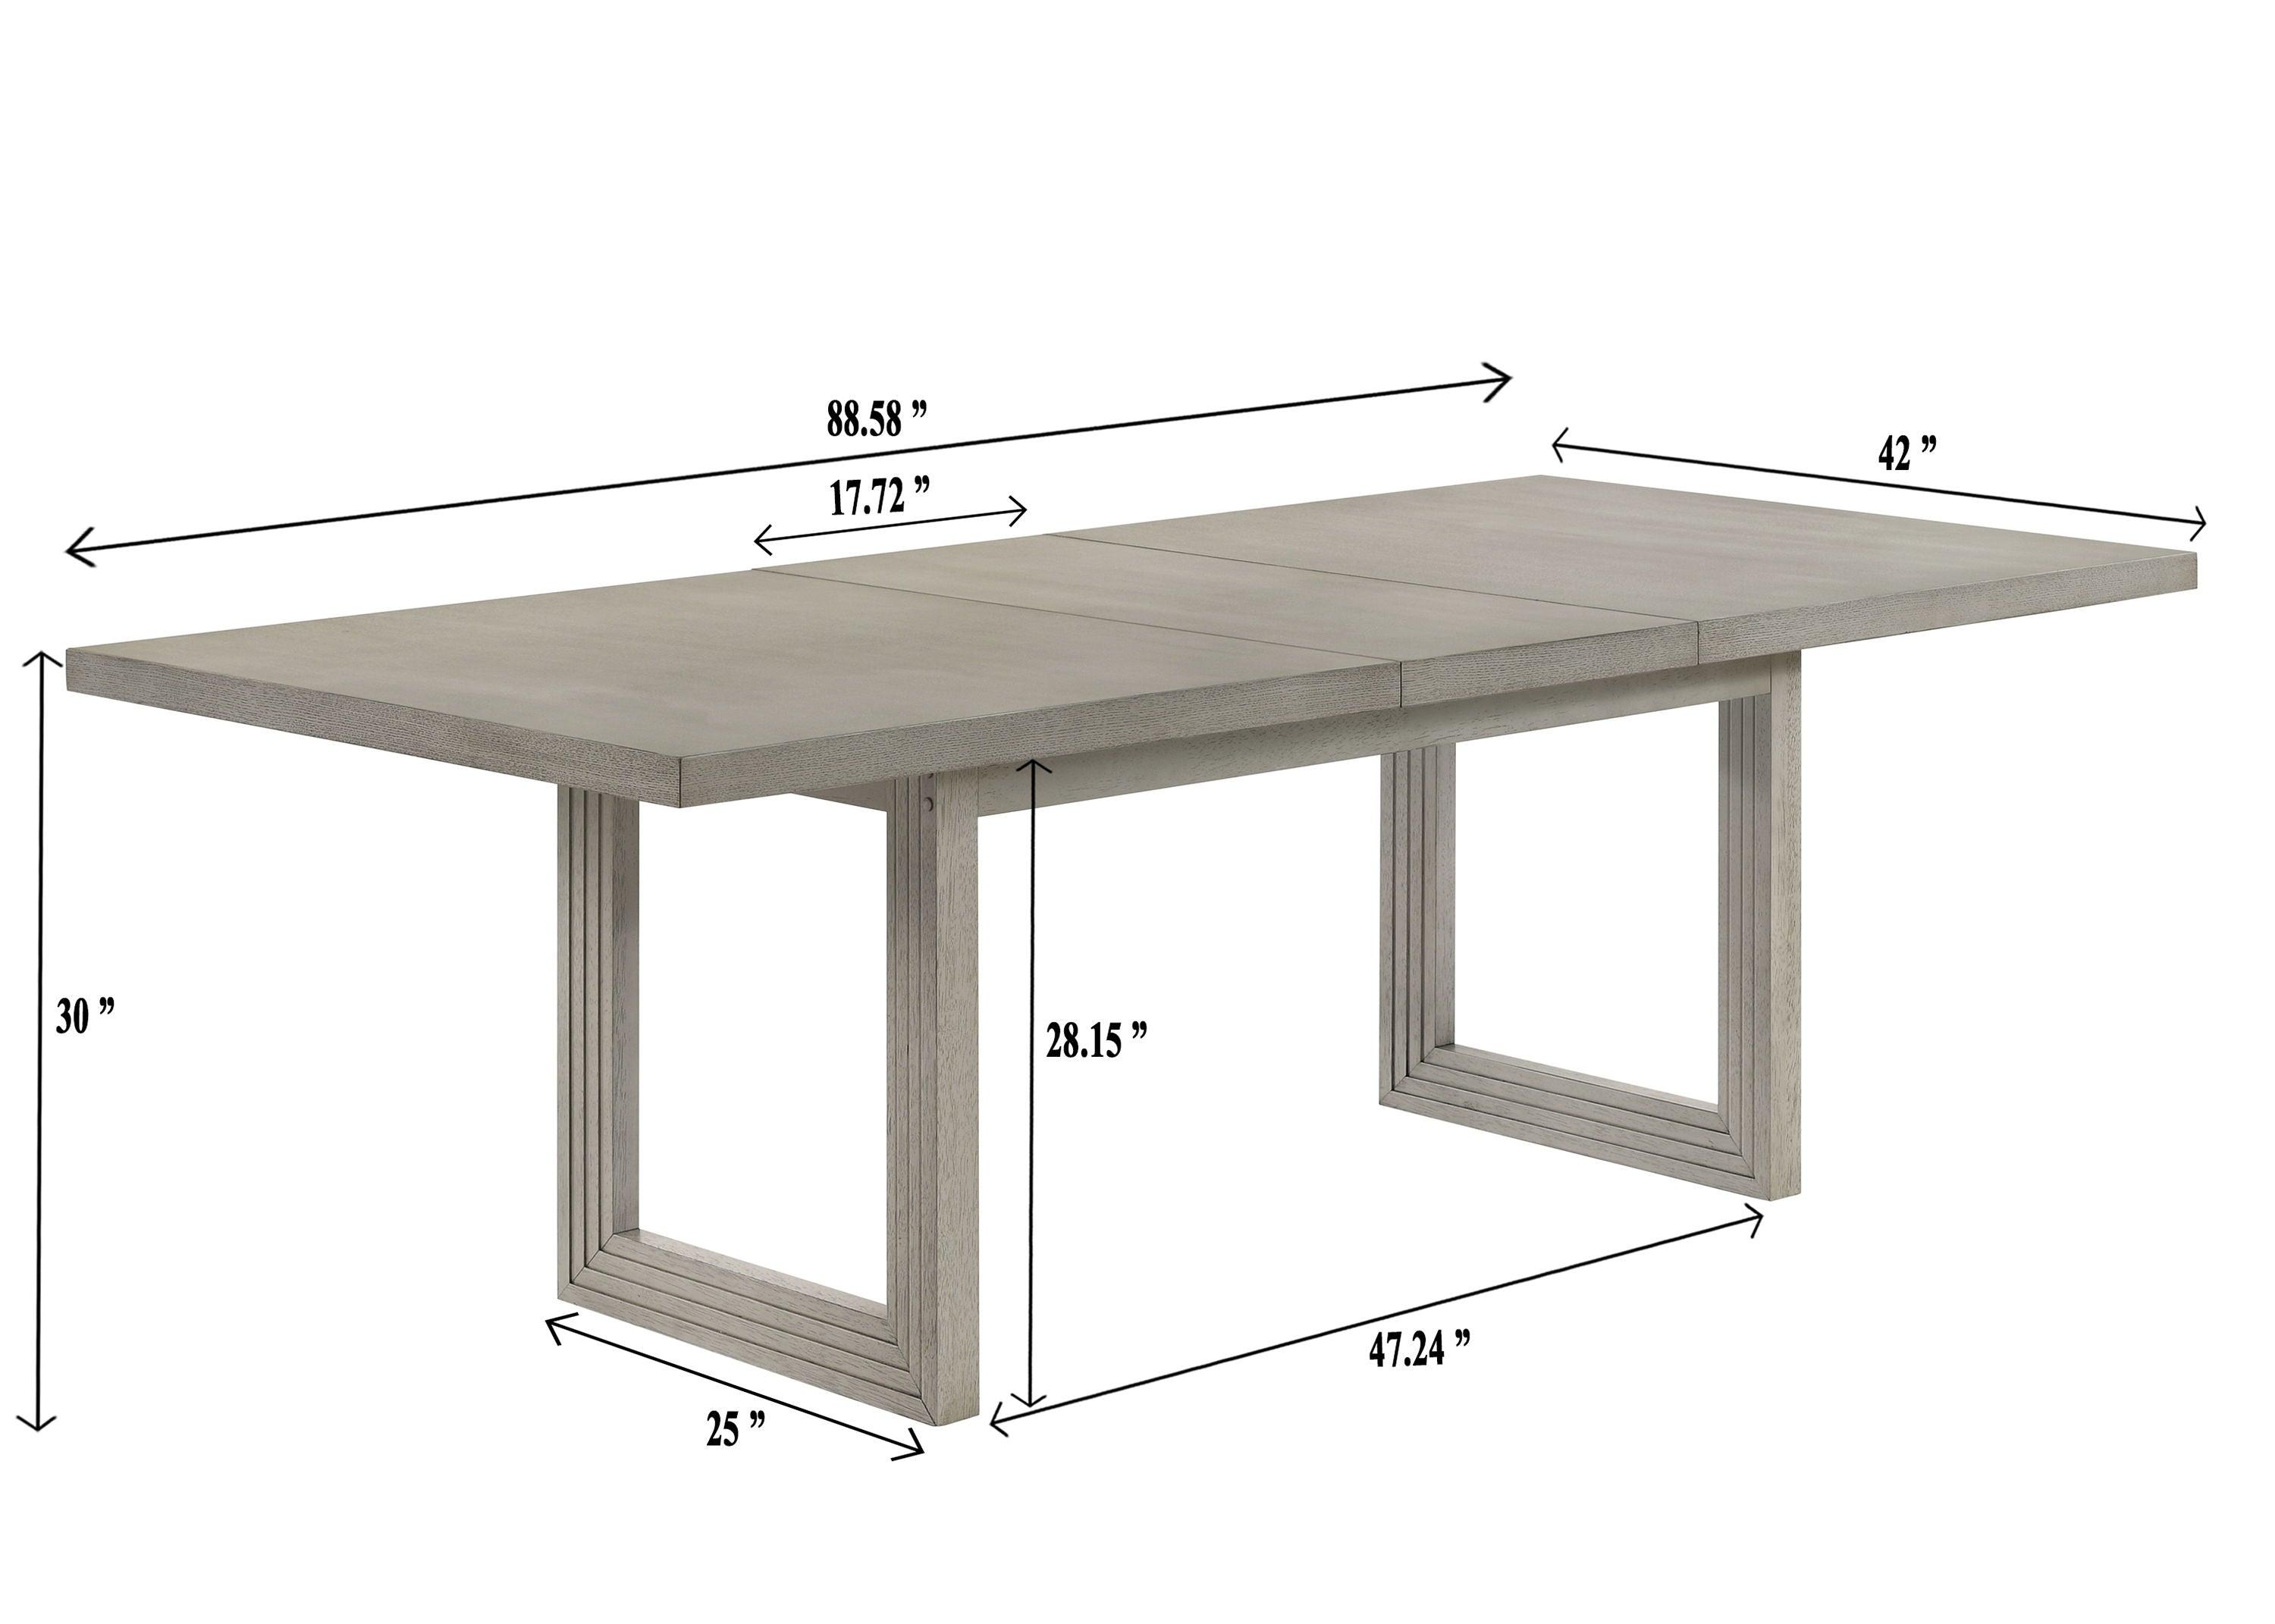 Crown Mark - Torrie - Dining Table (1x18 Leaf) - Gray - 5th Avenue Furniture